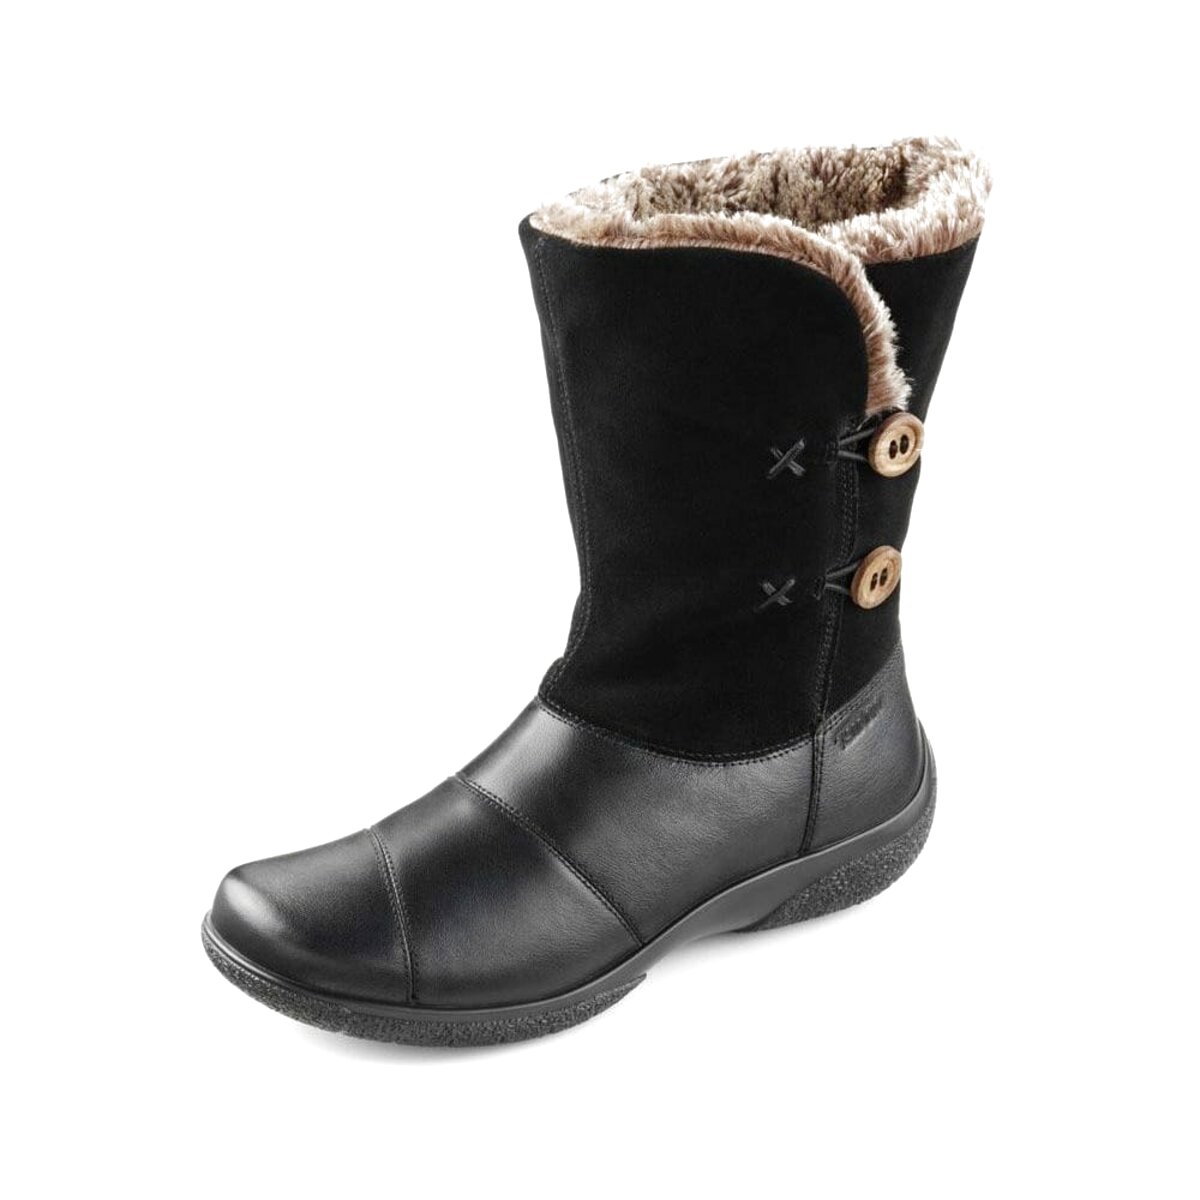 hotter boots clearance